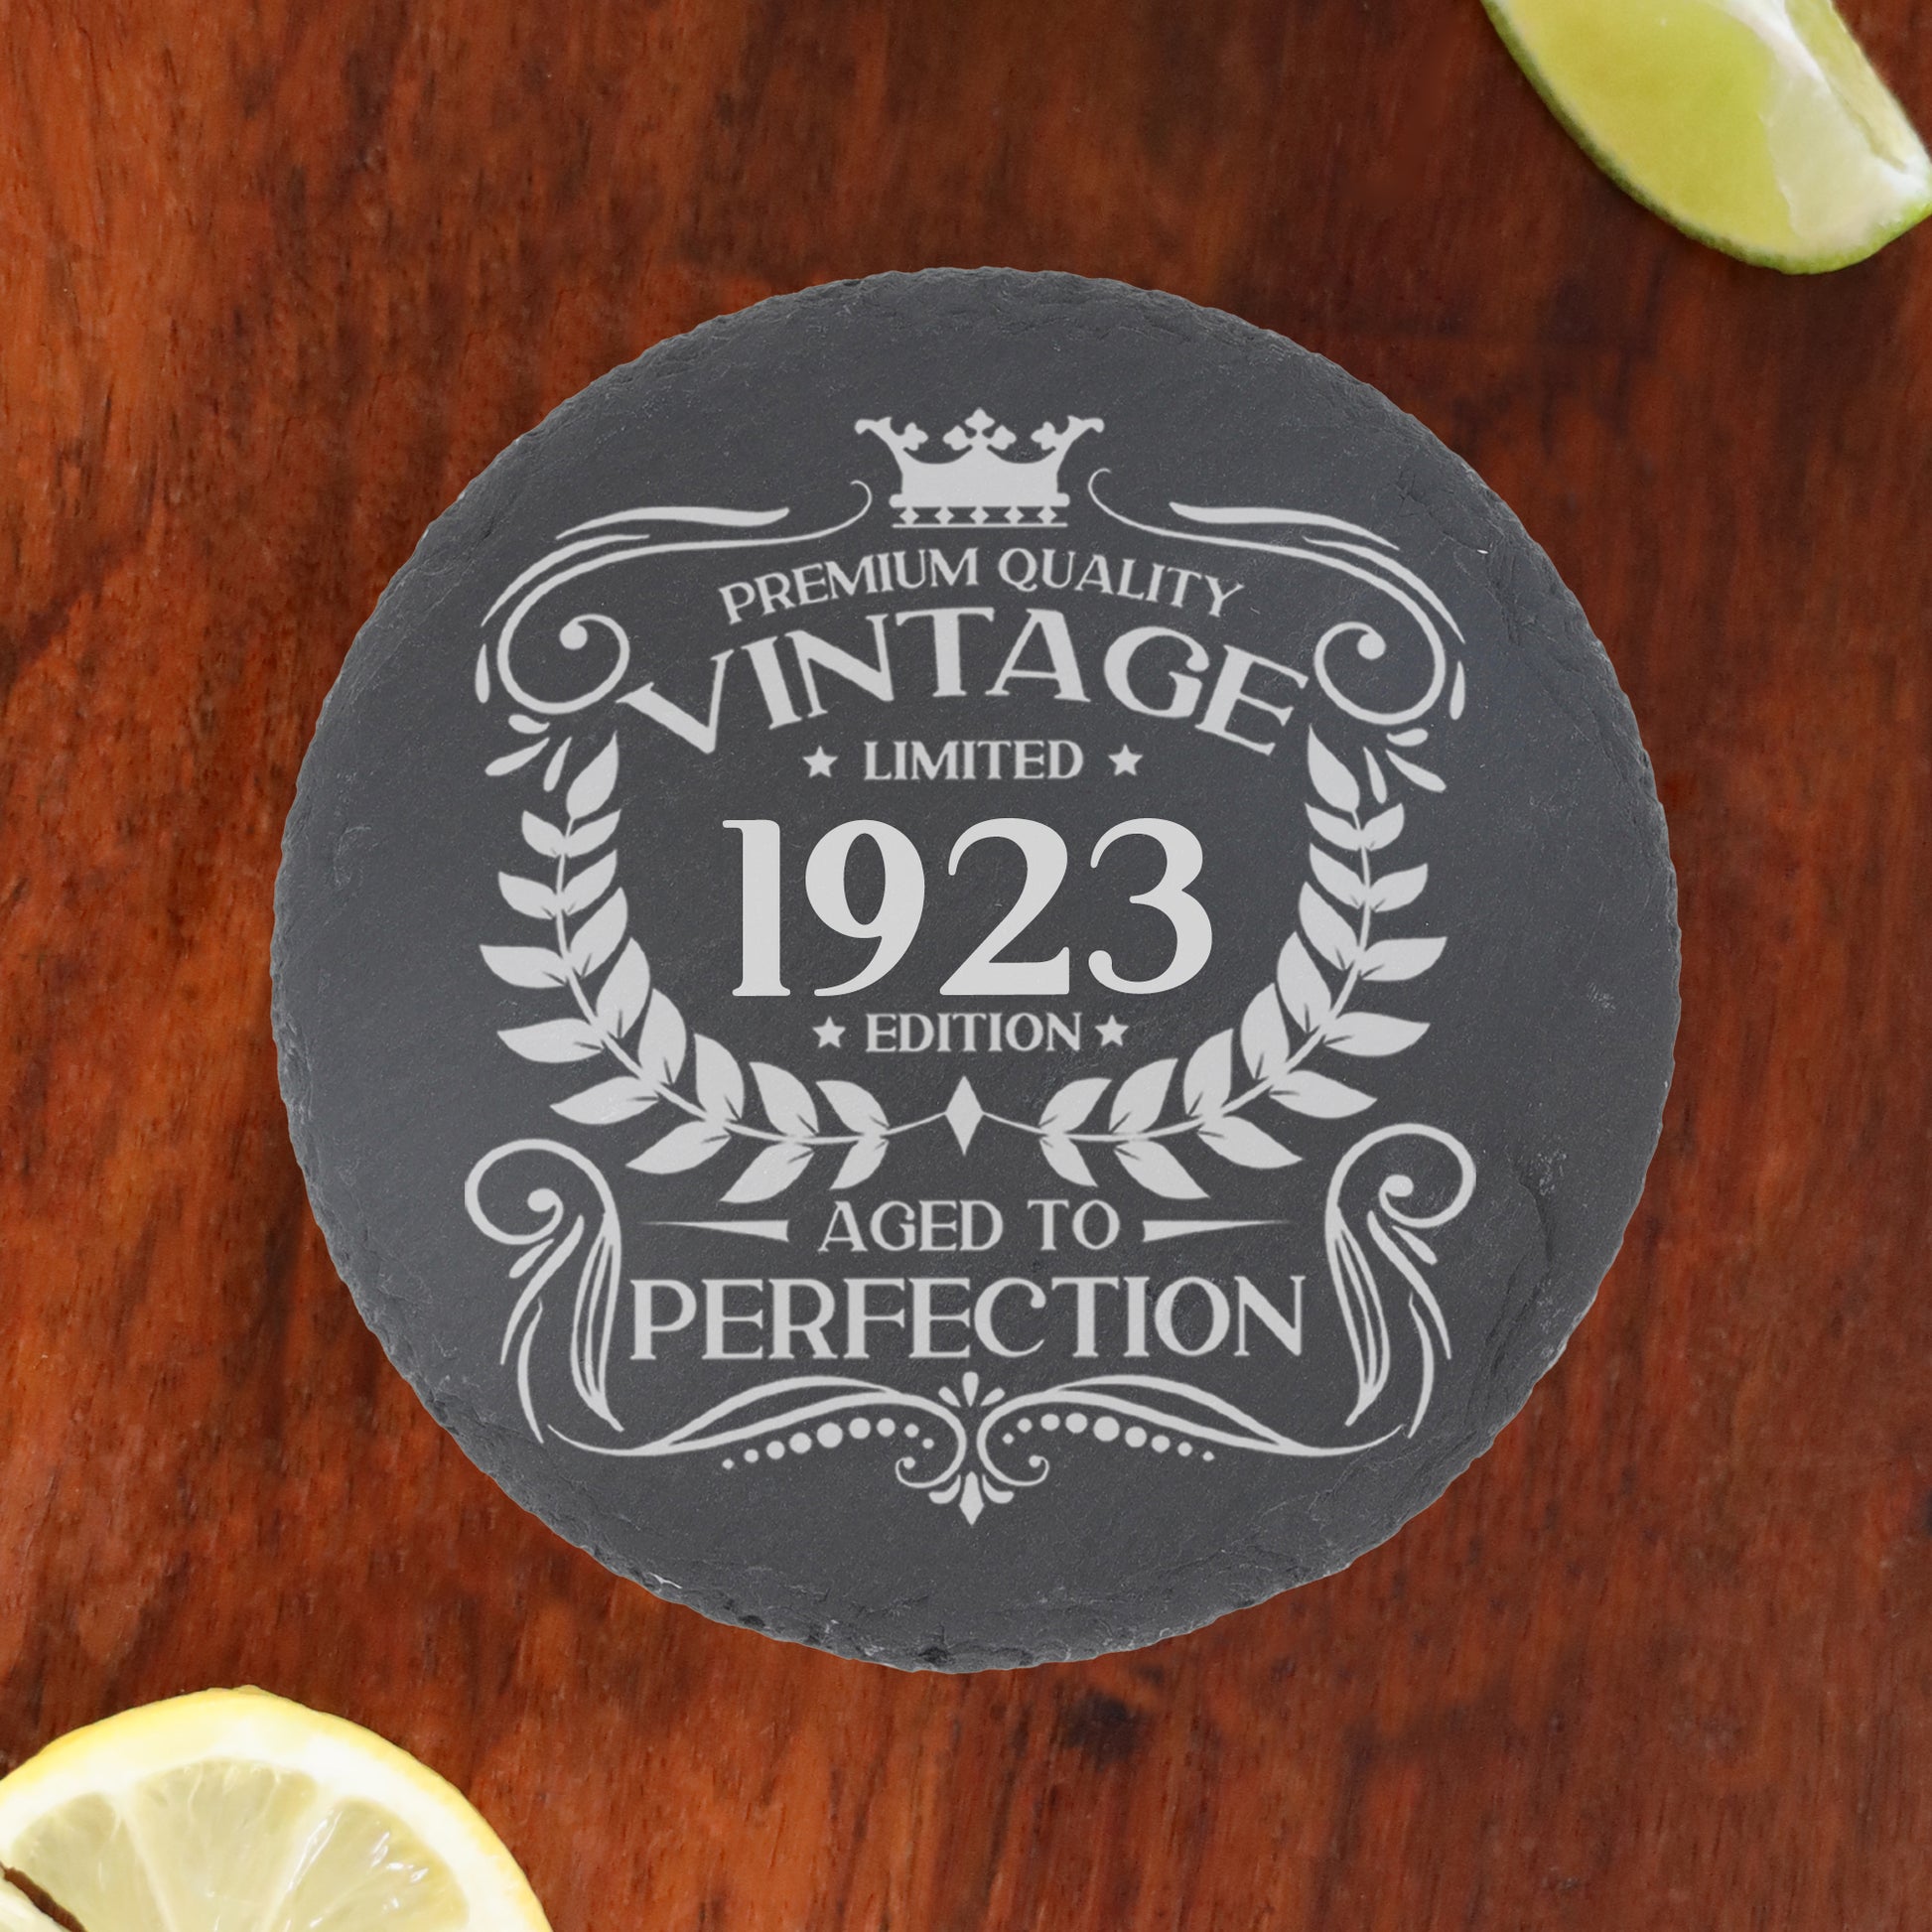 Personalised Vintage 1923 Mug and/or Coaster  - Always Looking Good - Round Coaster On Its Own  